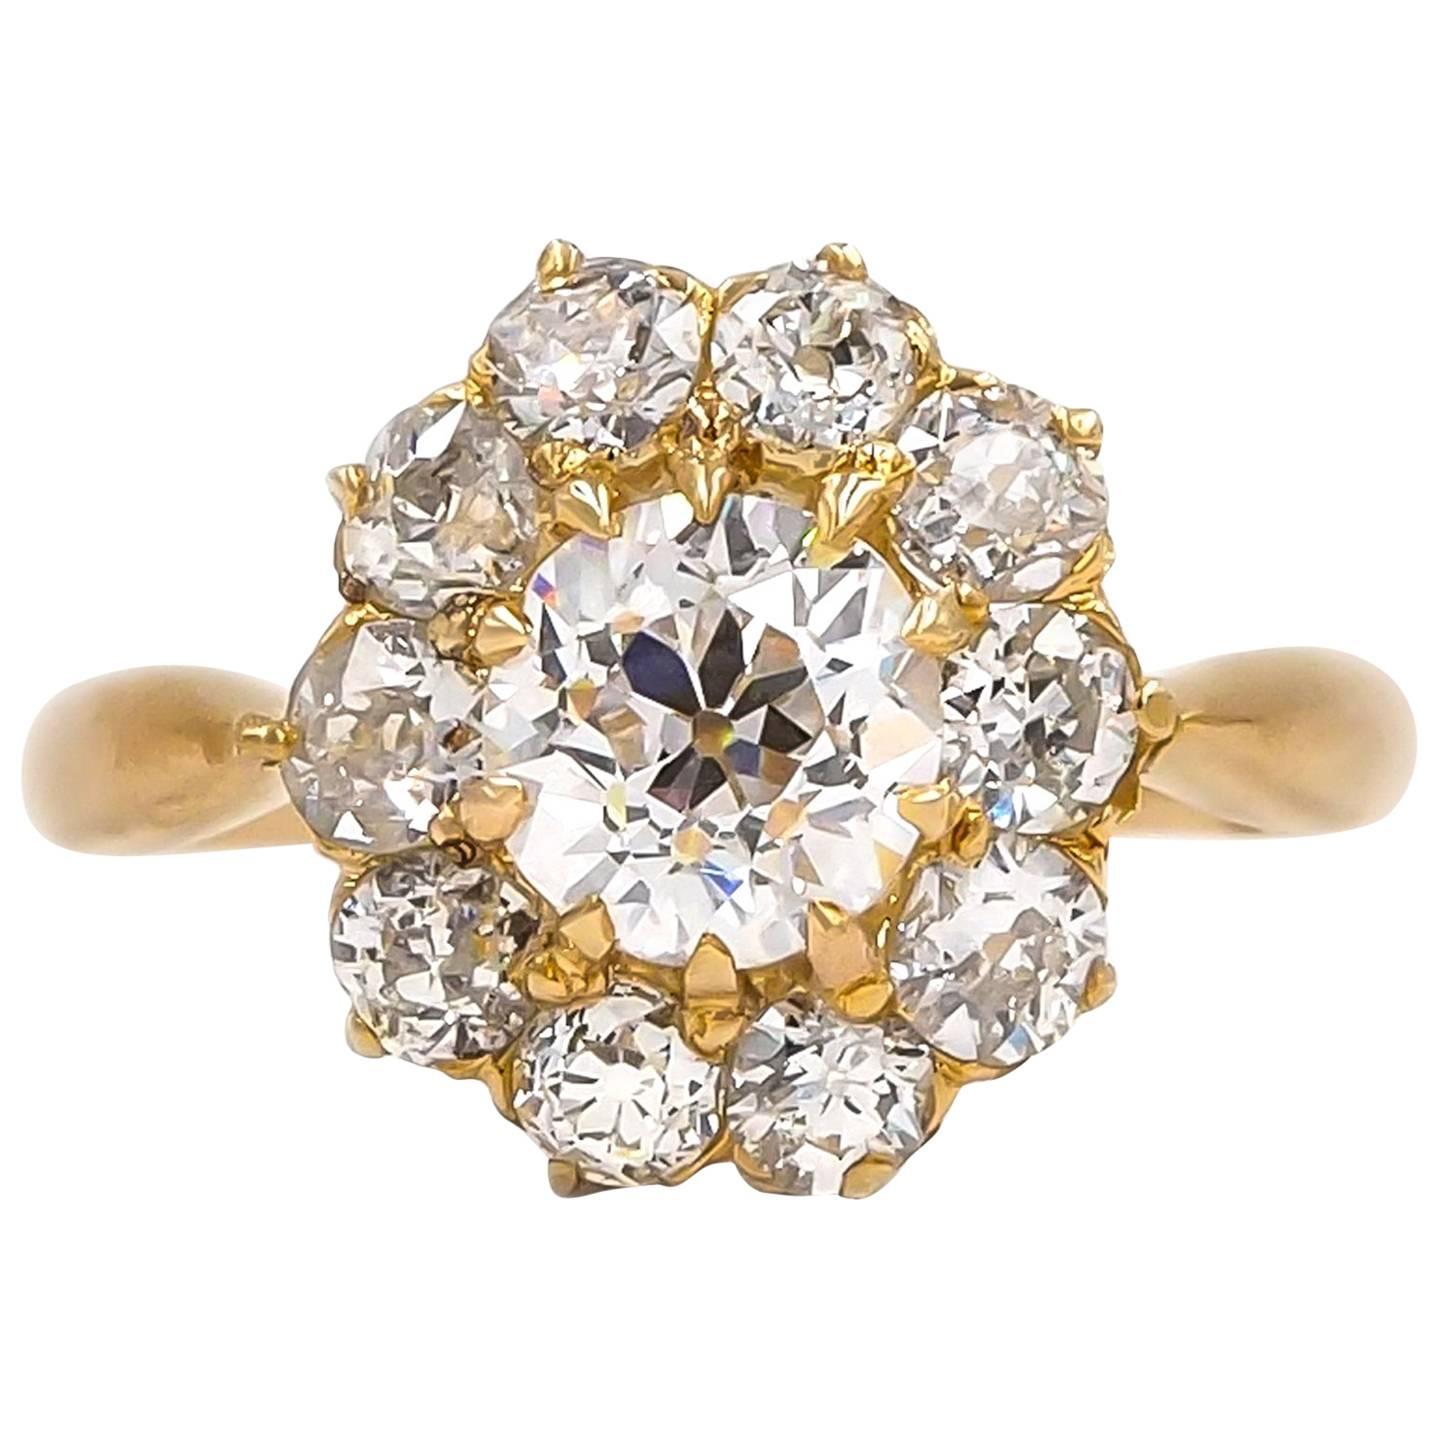 French Victorian GIA Certified 1.26 Carat Old European Cut Diamond Cluster Ring